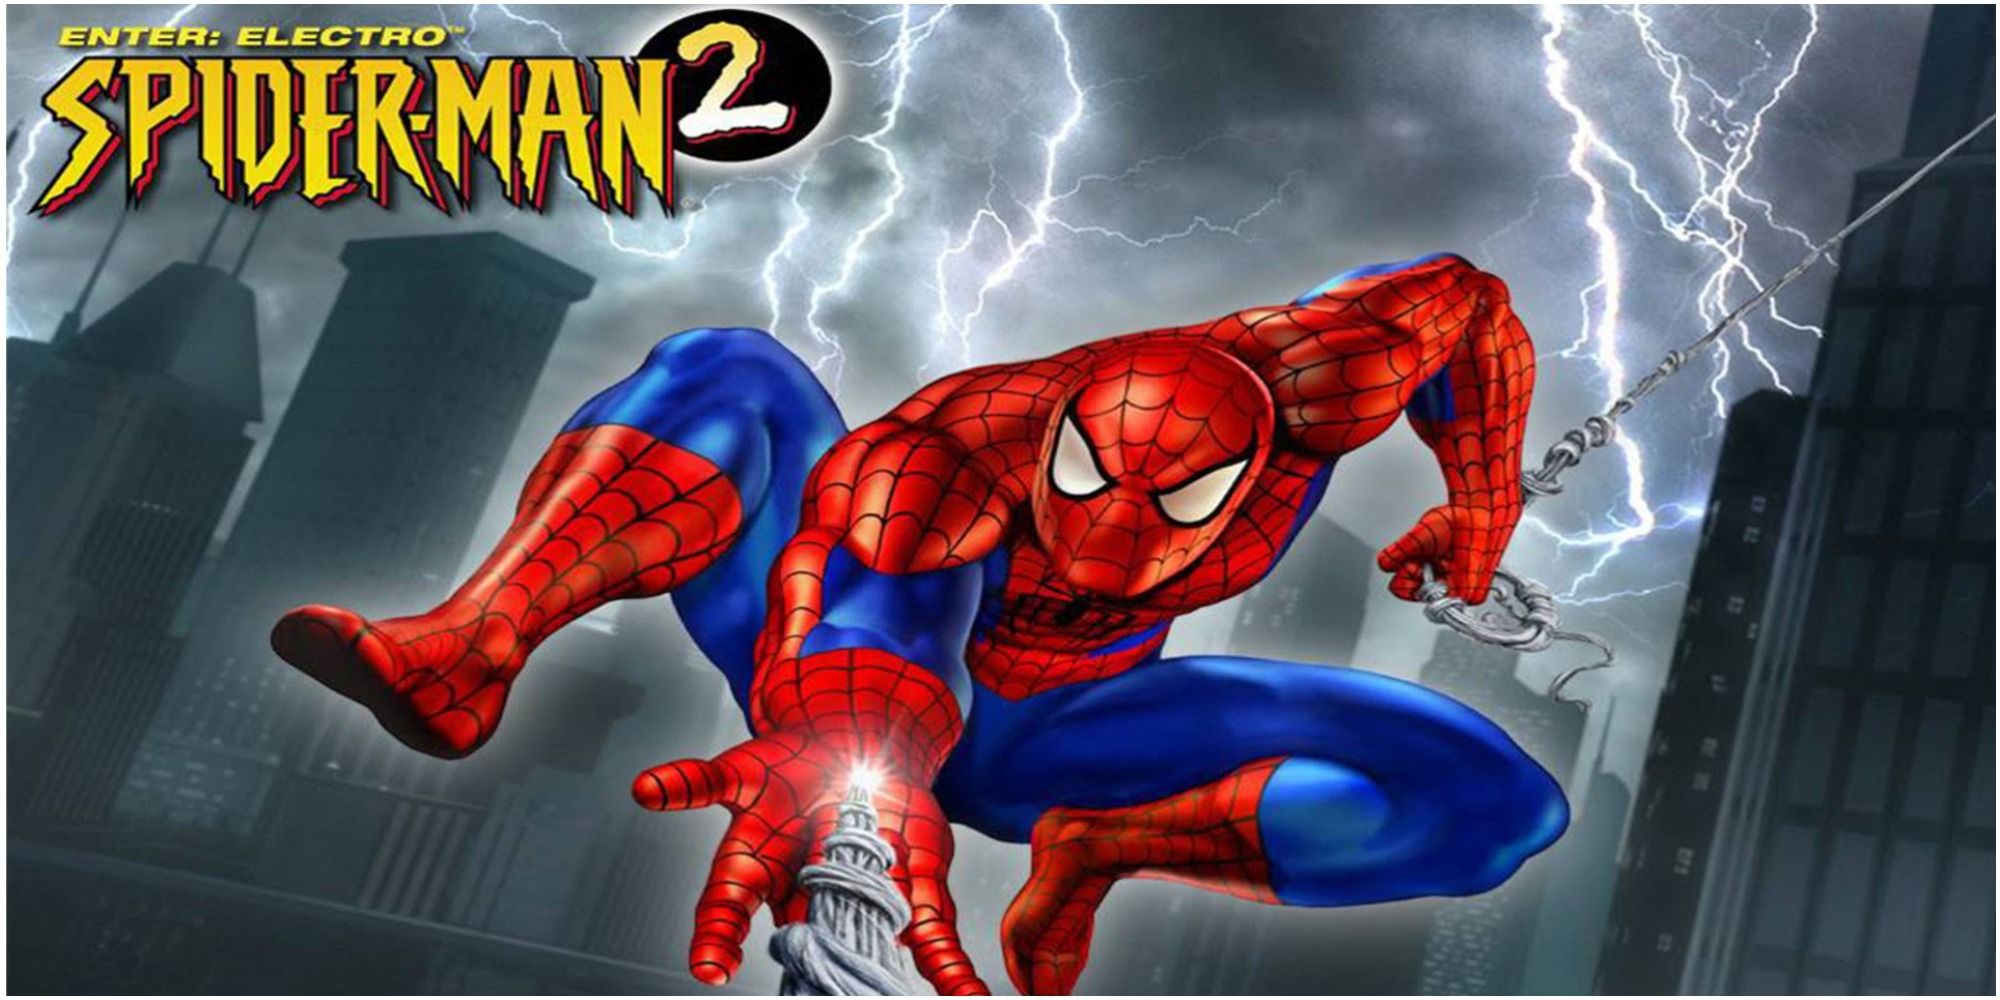 Cover of Spider-Man 2 Enter Electro for the fifth generation of consoles